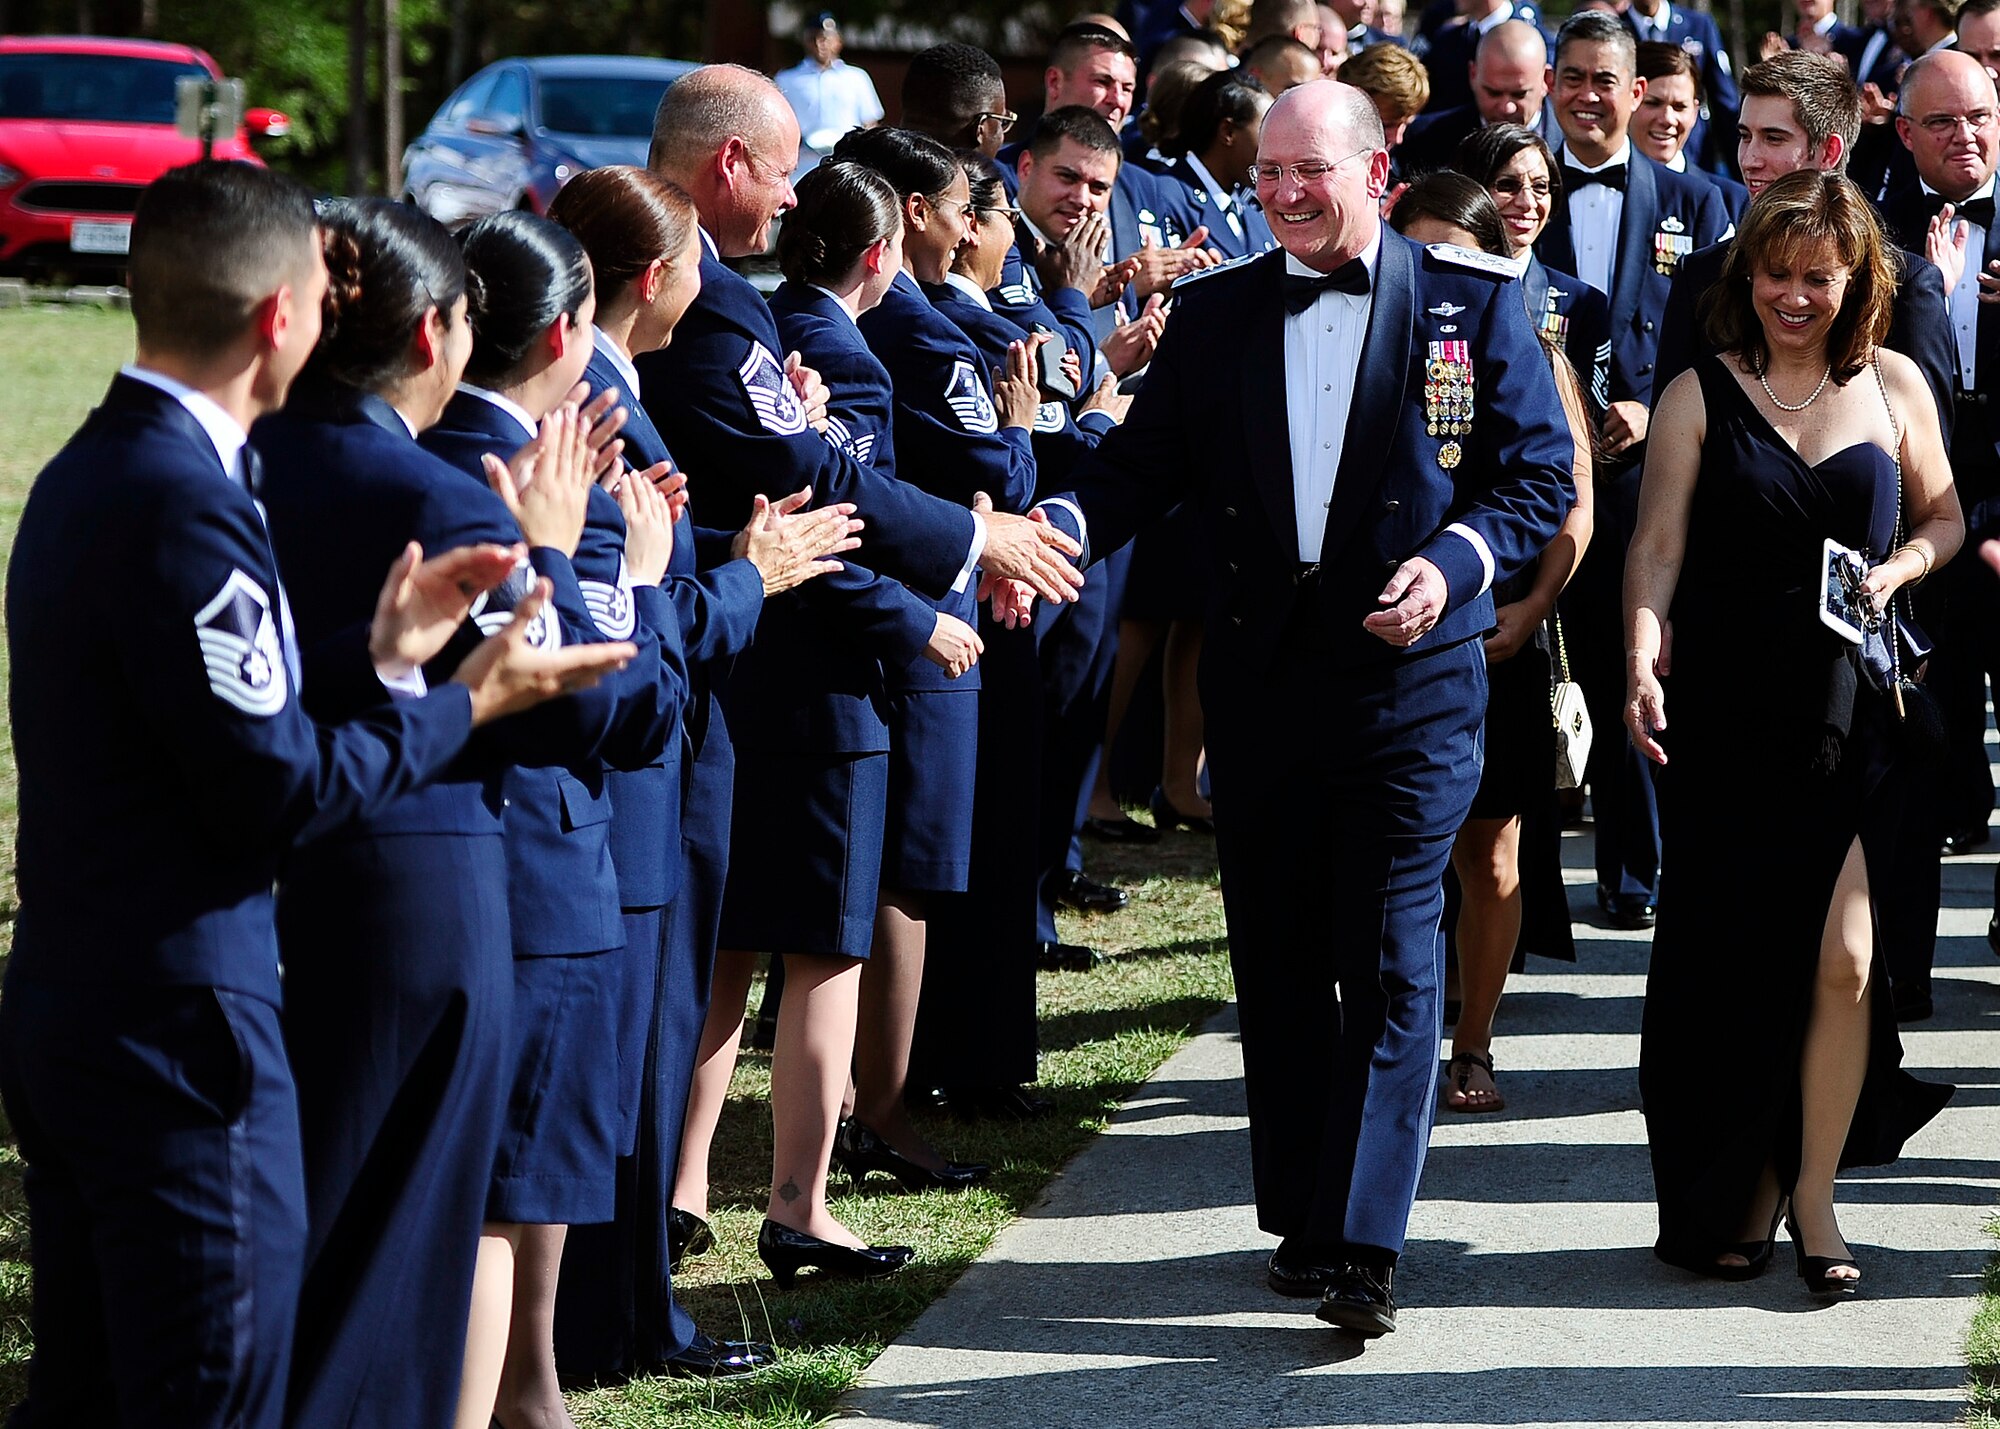 Former chief of Air Force Reserve Command, Lt. Gen. James F. Jackson, greets enlisted members before the Order of the Sword ceremony in his honor at the Museum of Aviation in Warner Robins, Ga., July 13, 2016. The Order of the Sword is an honor awarded by the NCOs of a command to recognize individuals they hold in high esteem and for their contributions to the enlisted corps. (U.S. Air Force photo by Tech. Sgt. Stephen D. Schester)